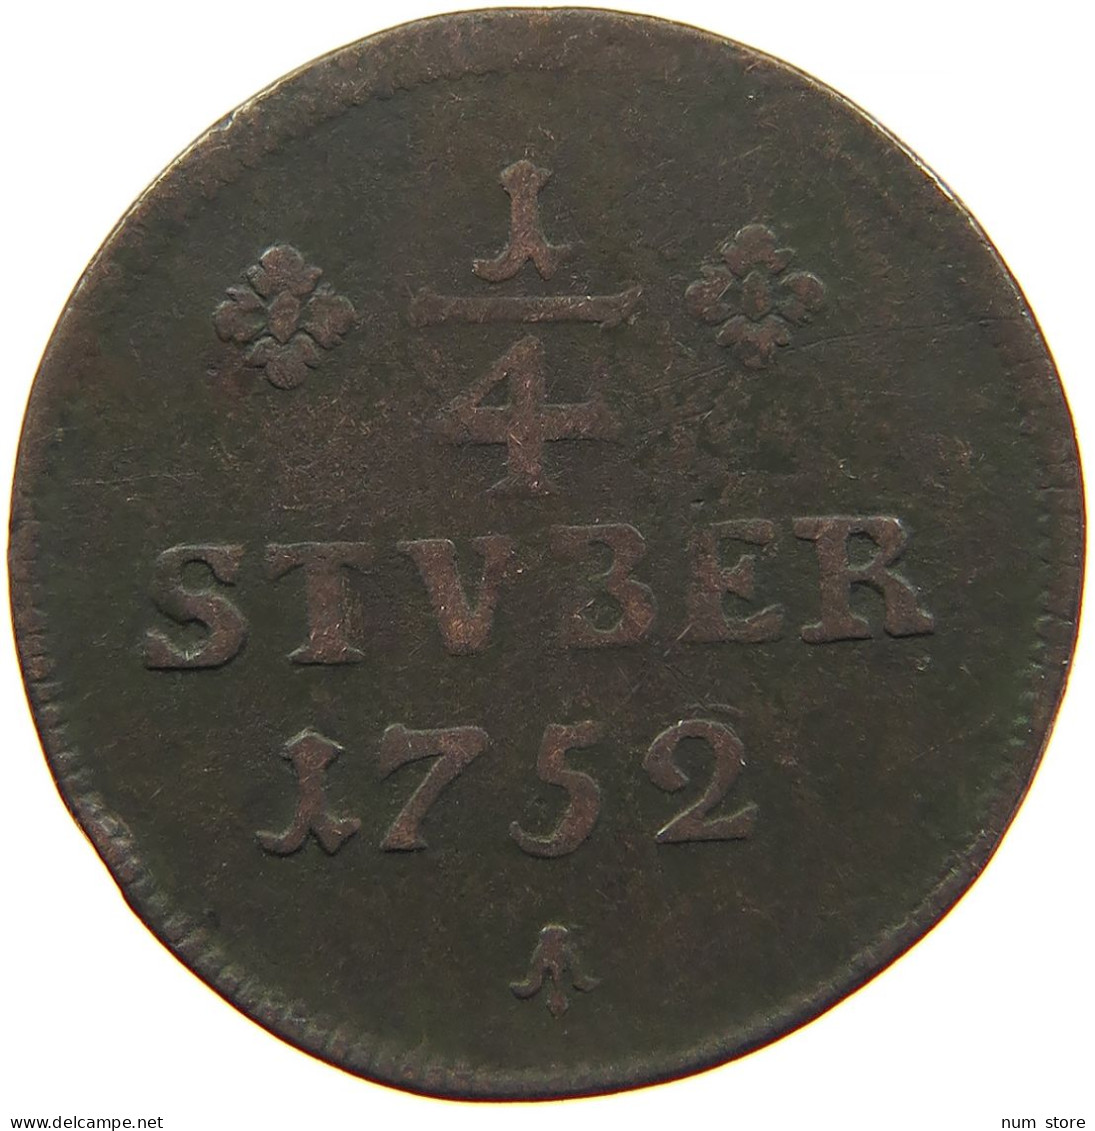 GERMAN STATES 1/4 STÜBER 1752 WIED RUNKEL Johann Ludwig Adolf, 1706-1752: #t032 0975 - Small Coins & Other Subdivisions